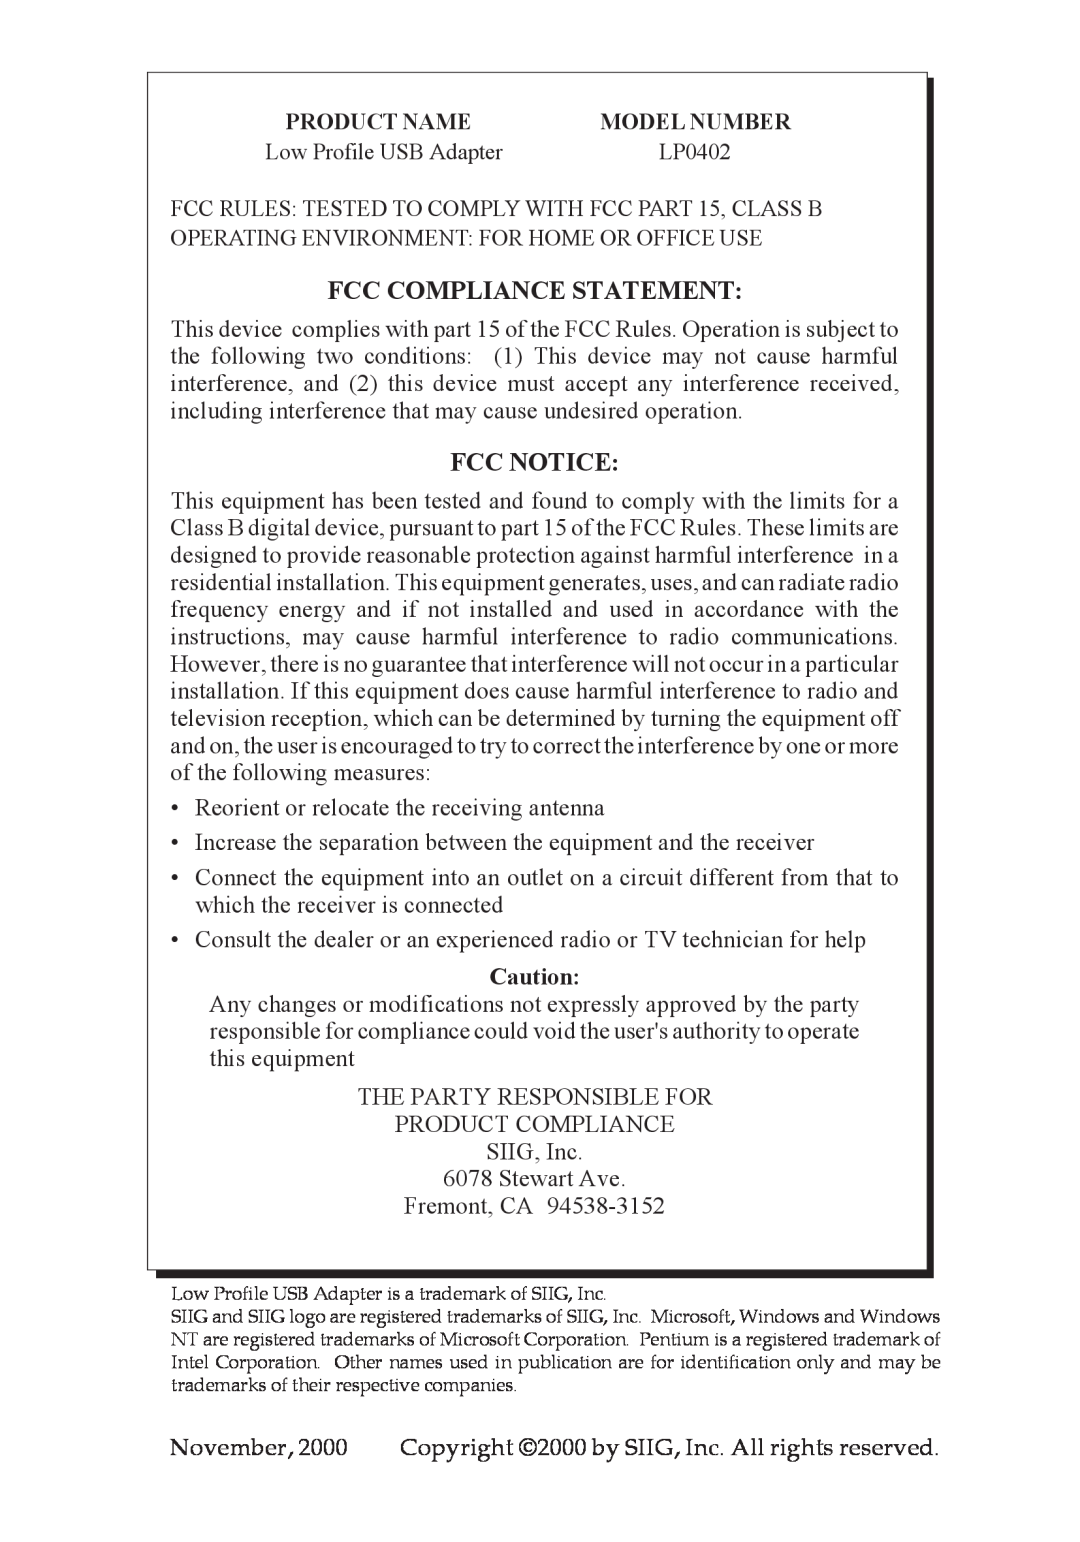 SIIG 04-0192A dimensions Fcc Compliance Statement, Fcc Notice 